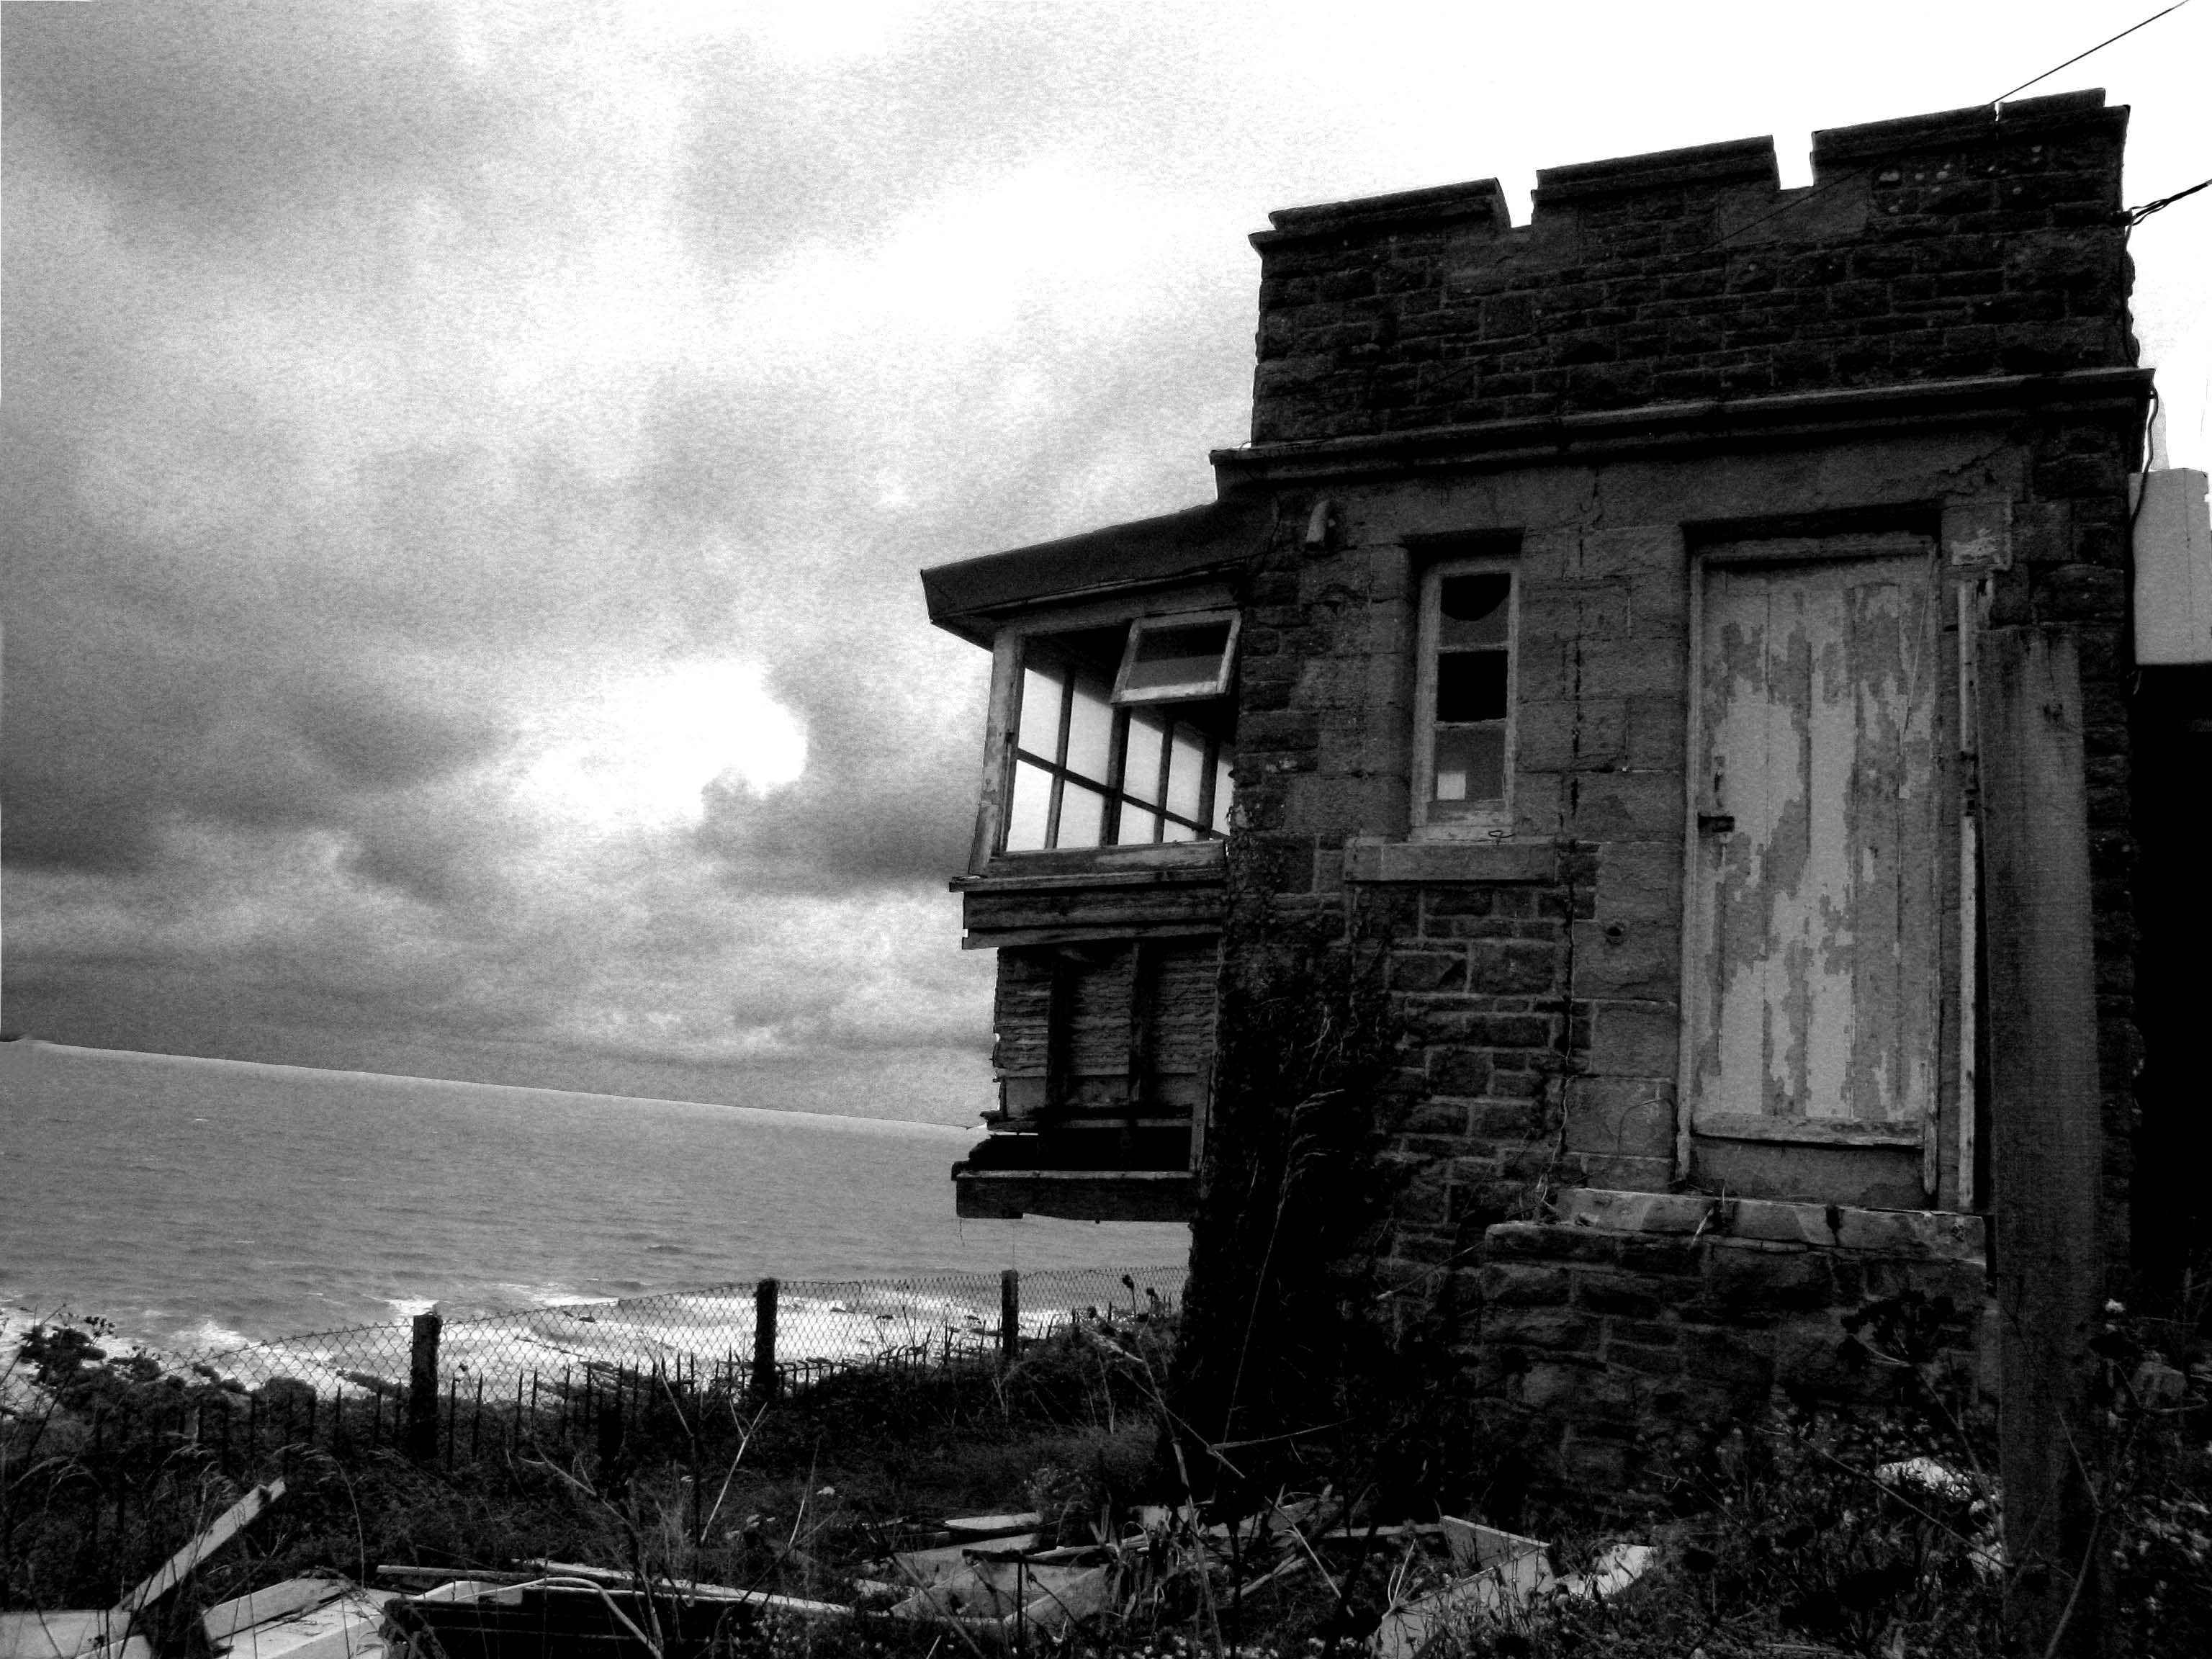 Home Sweet Home?, Abandoned, Bspo06, Building, B&w, HQ Photo